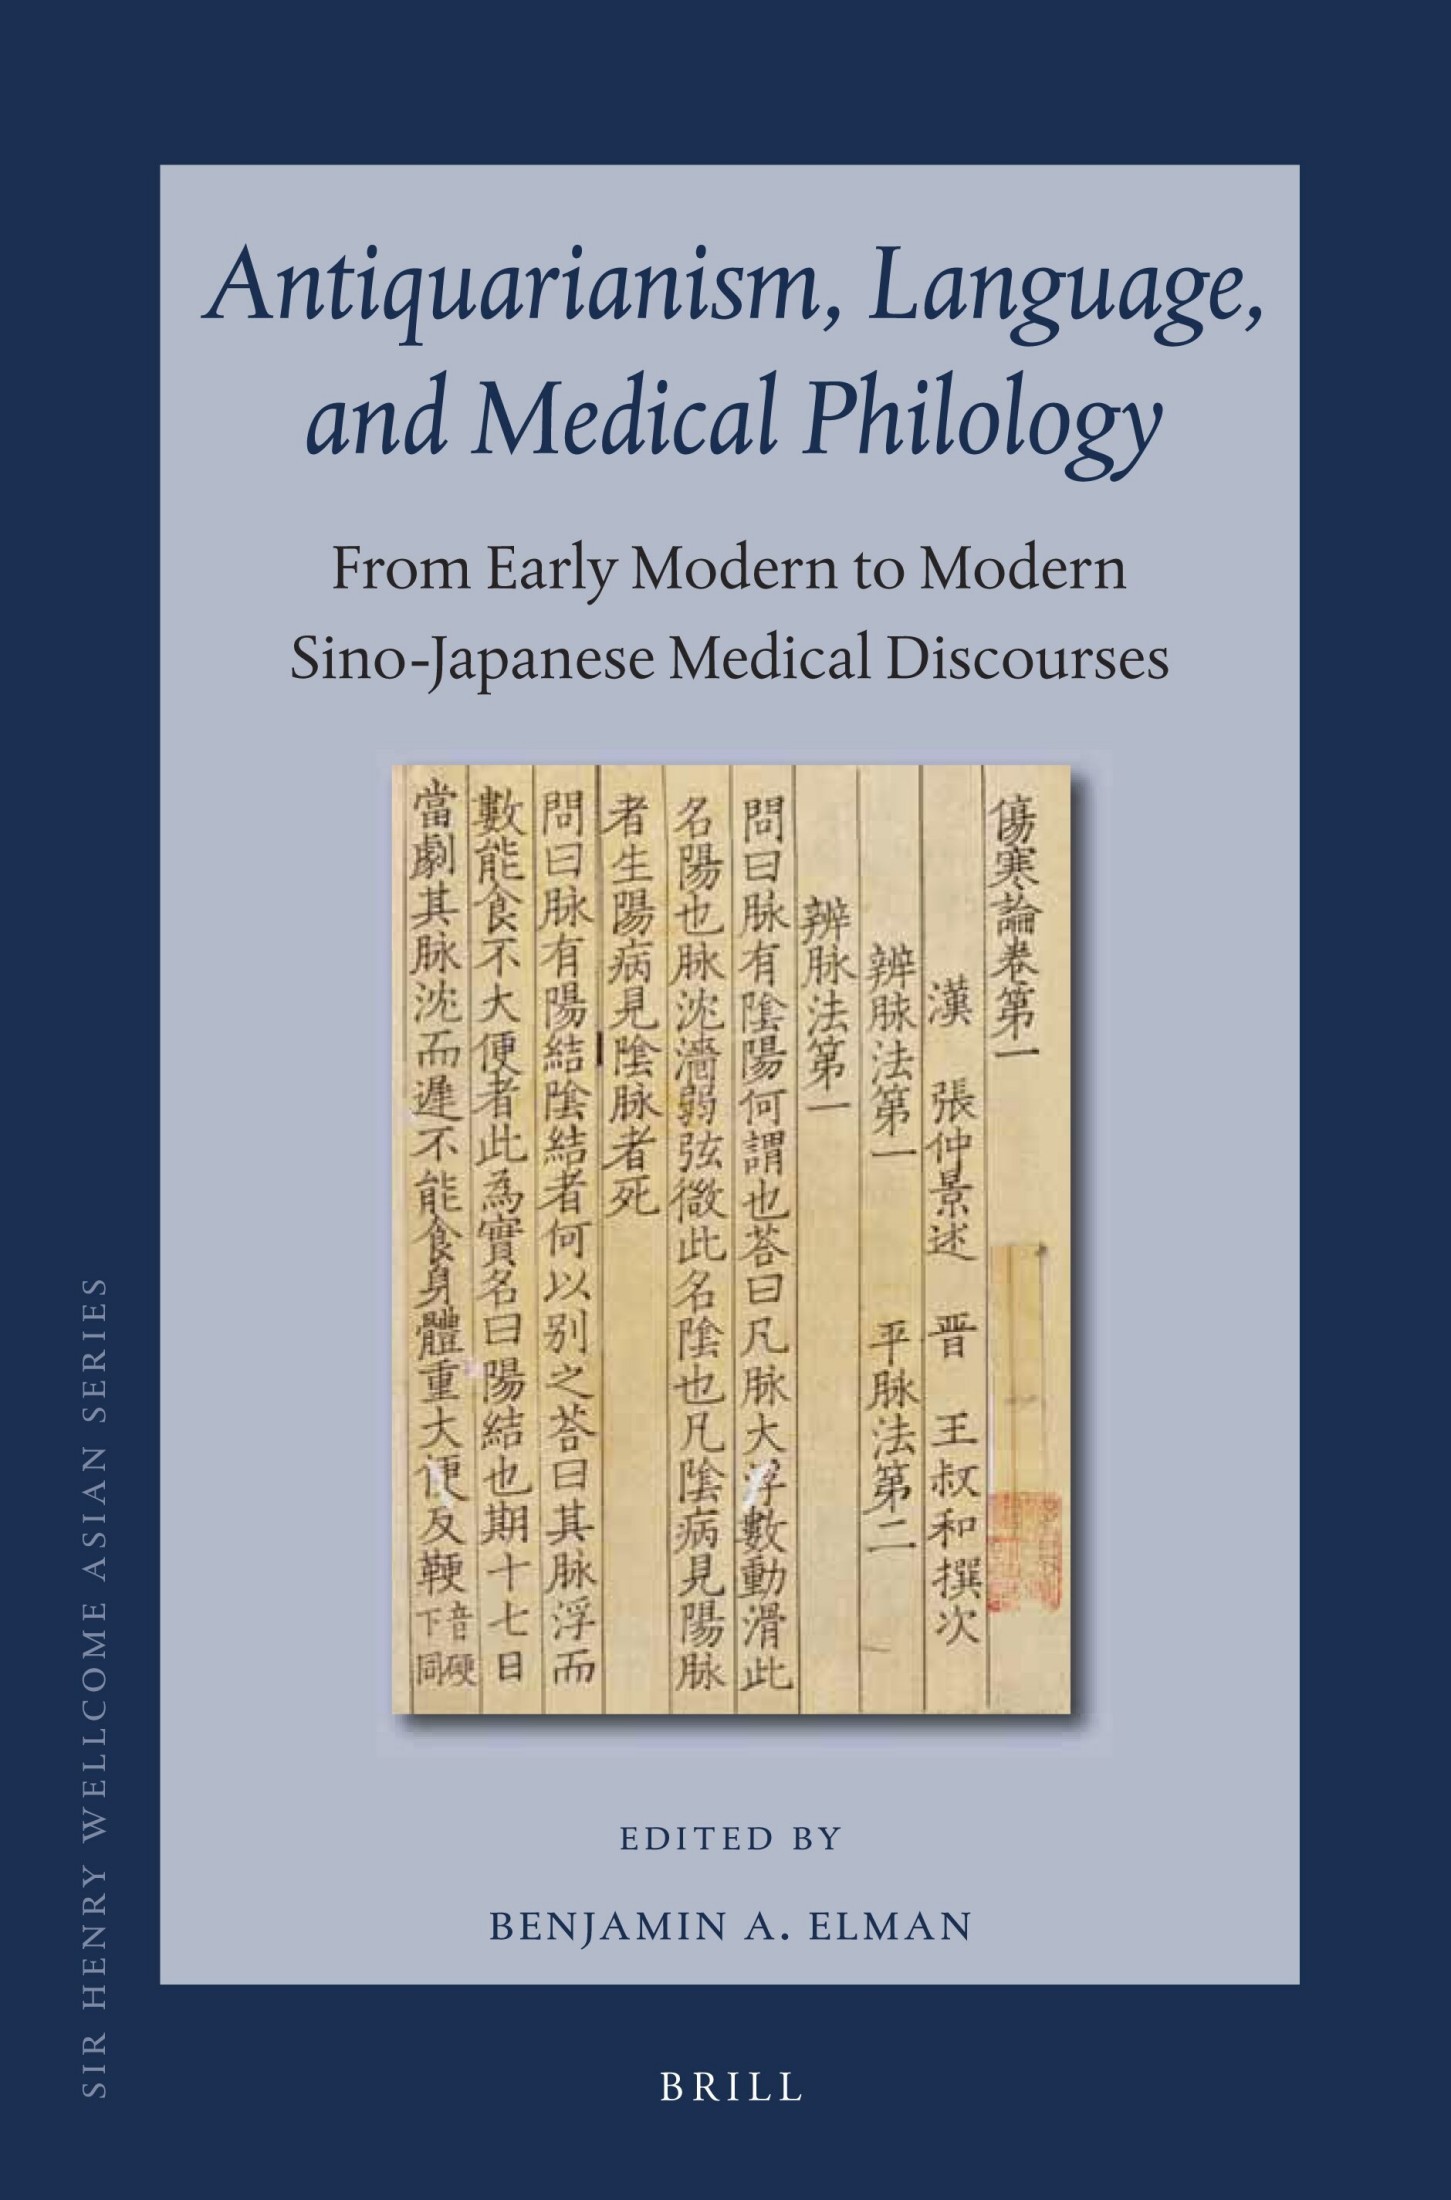 Antiquarianism, Language, and Medical Philology: From Early Modern to Modern Sino-Japanese Medical Discourses